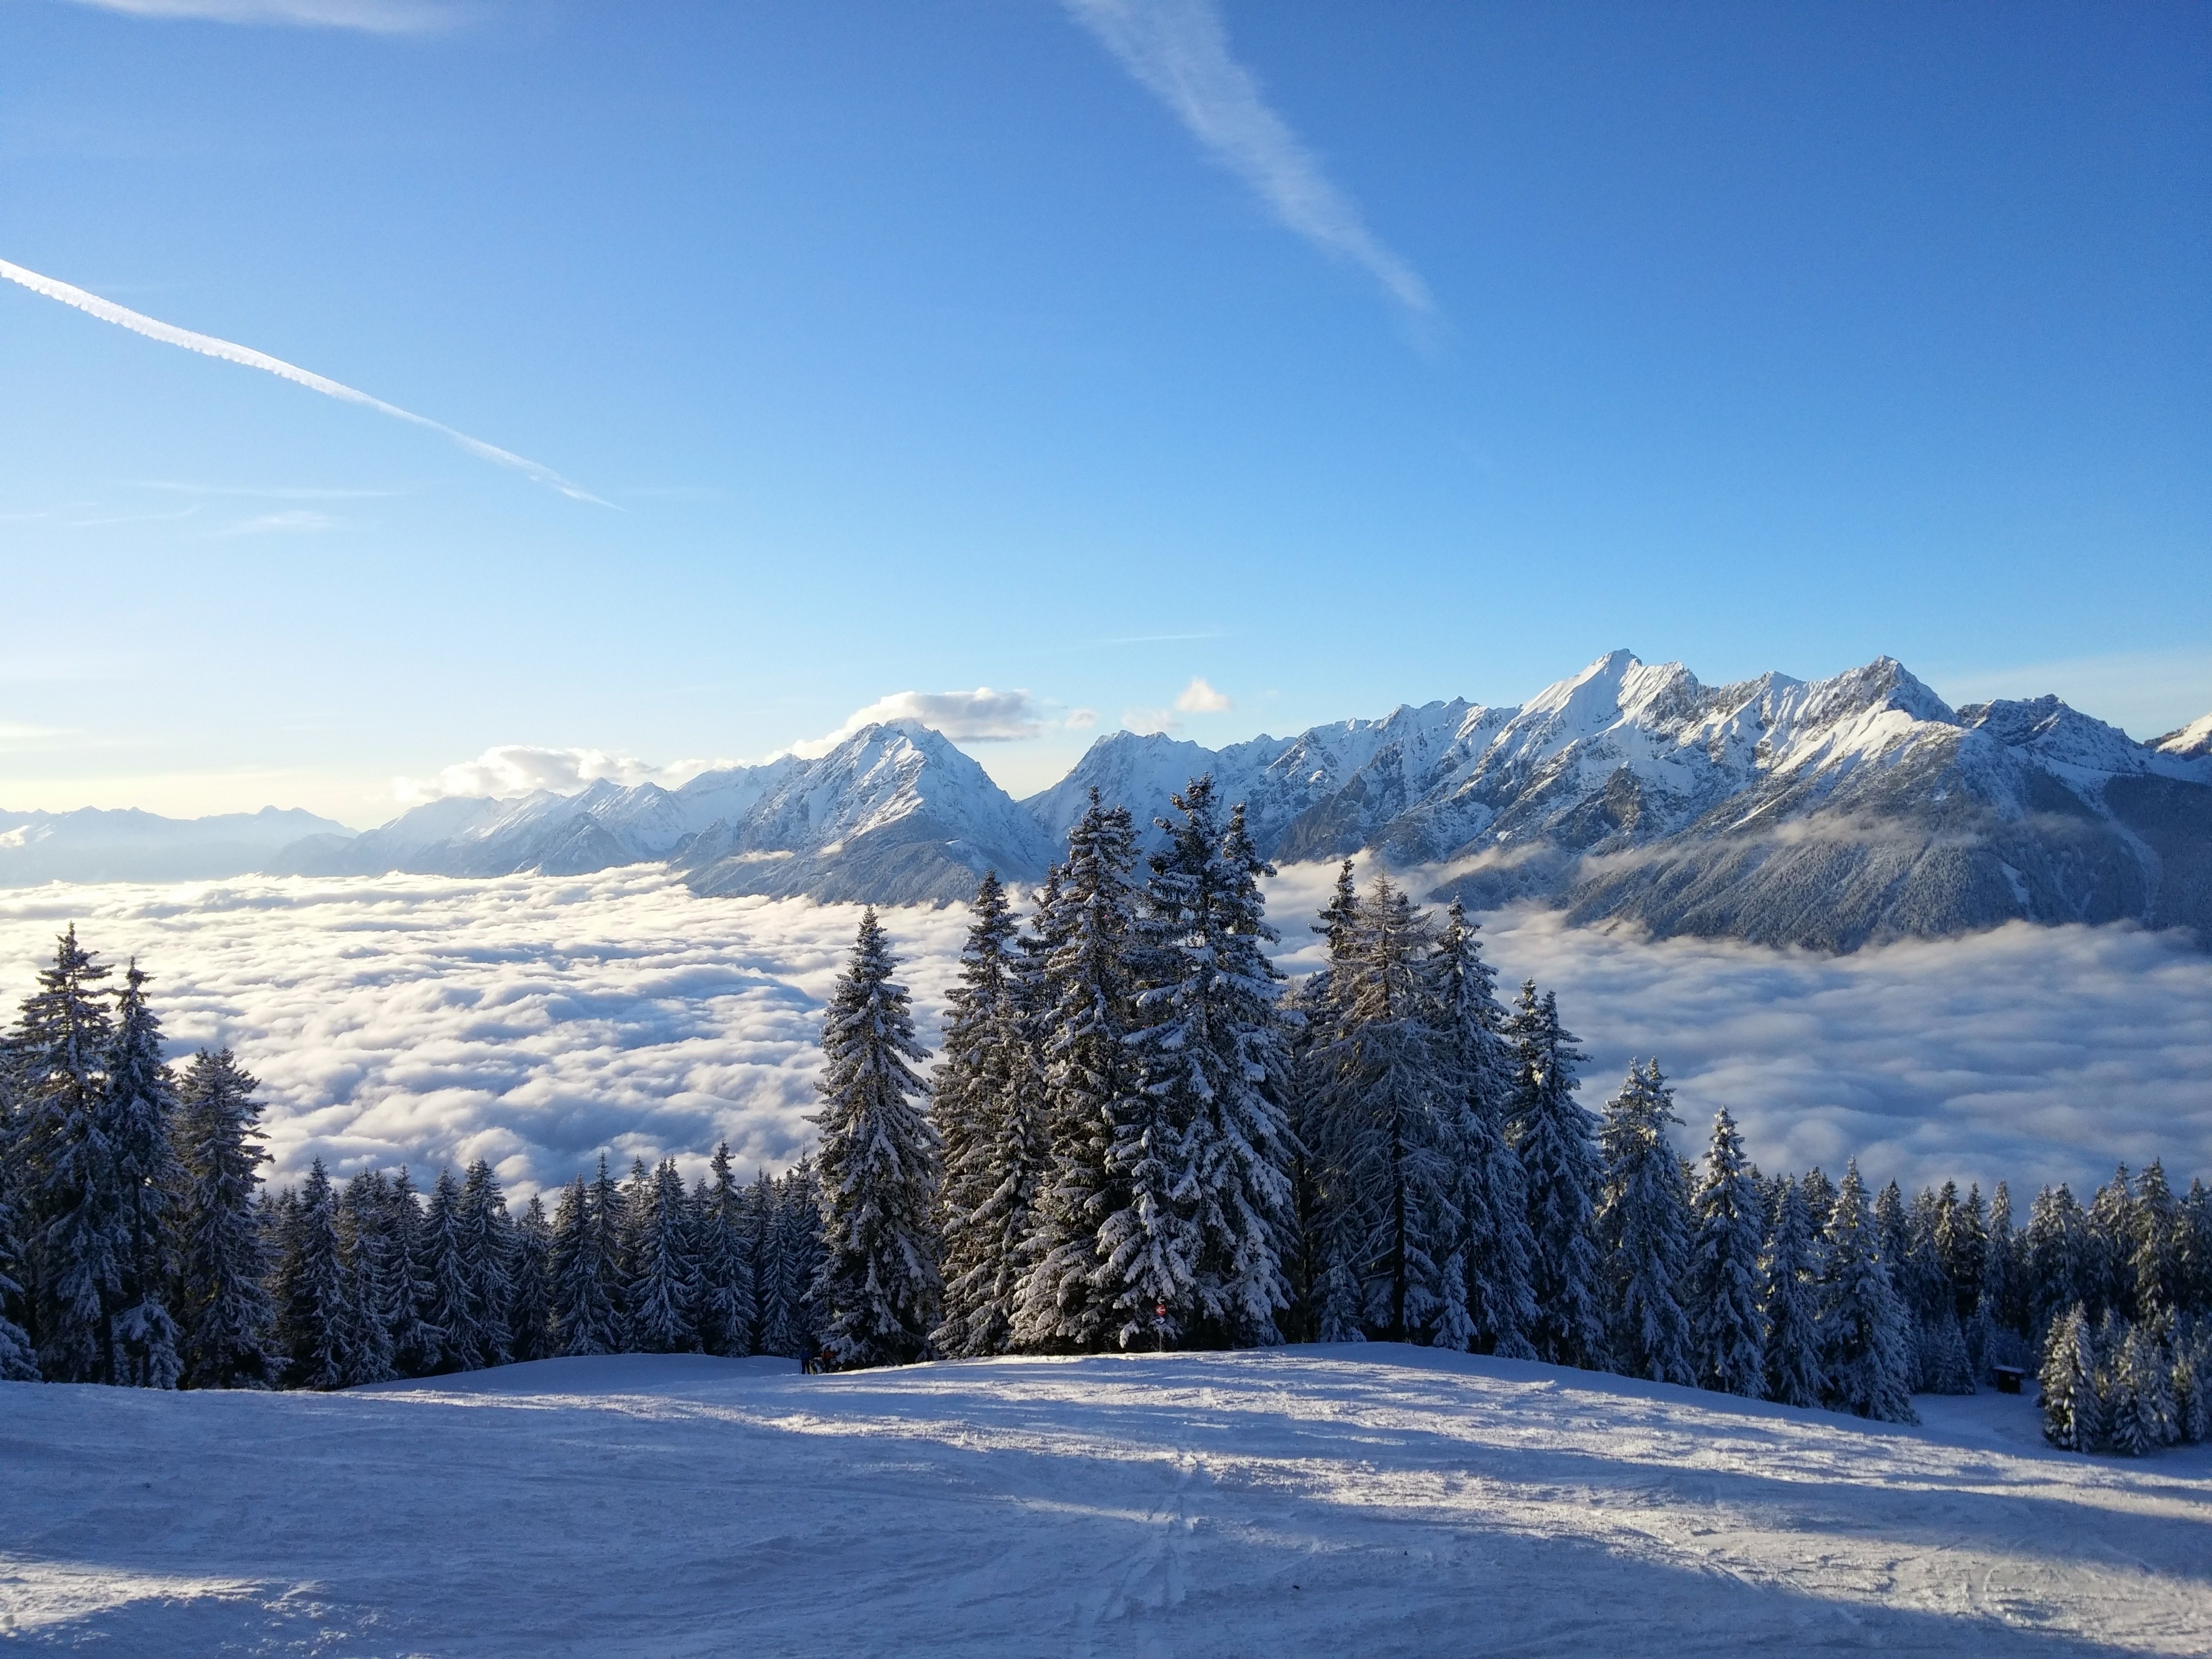 General 4160x3120 snow Austria Tyrol winter nature landscape mountains snowy peak clouds cold outdoors trees